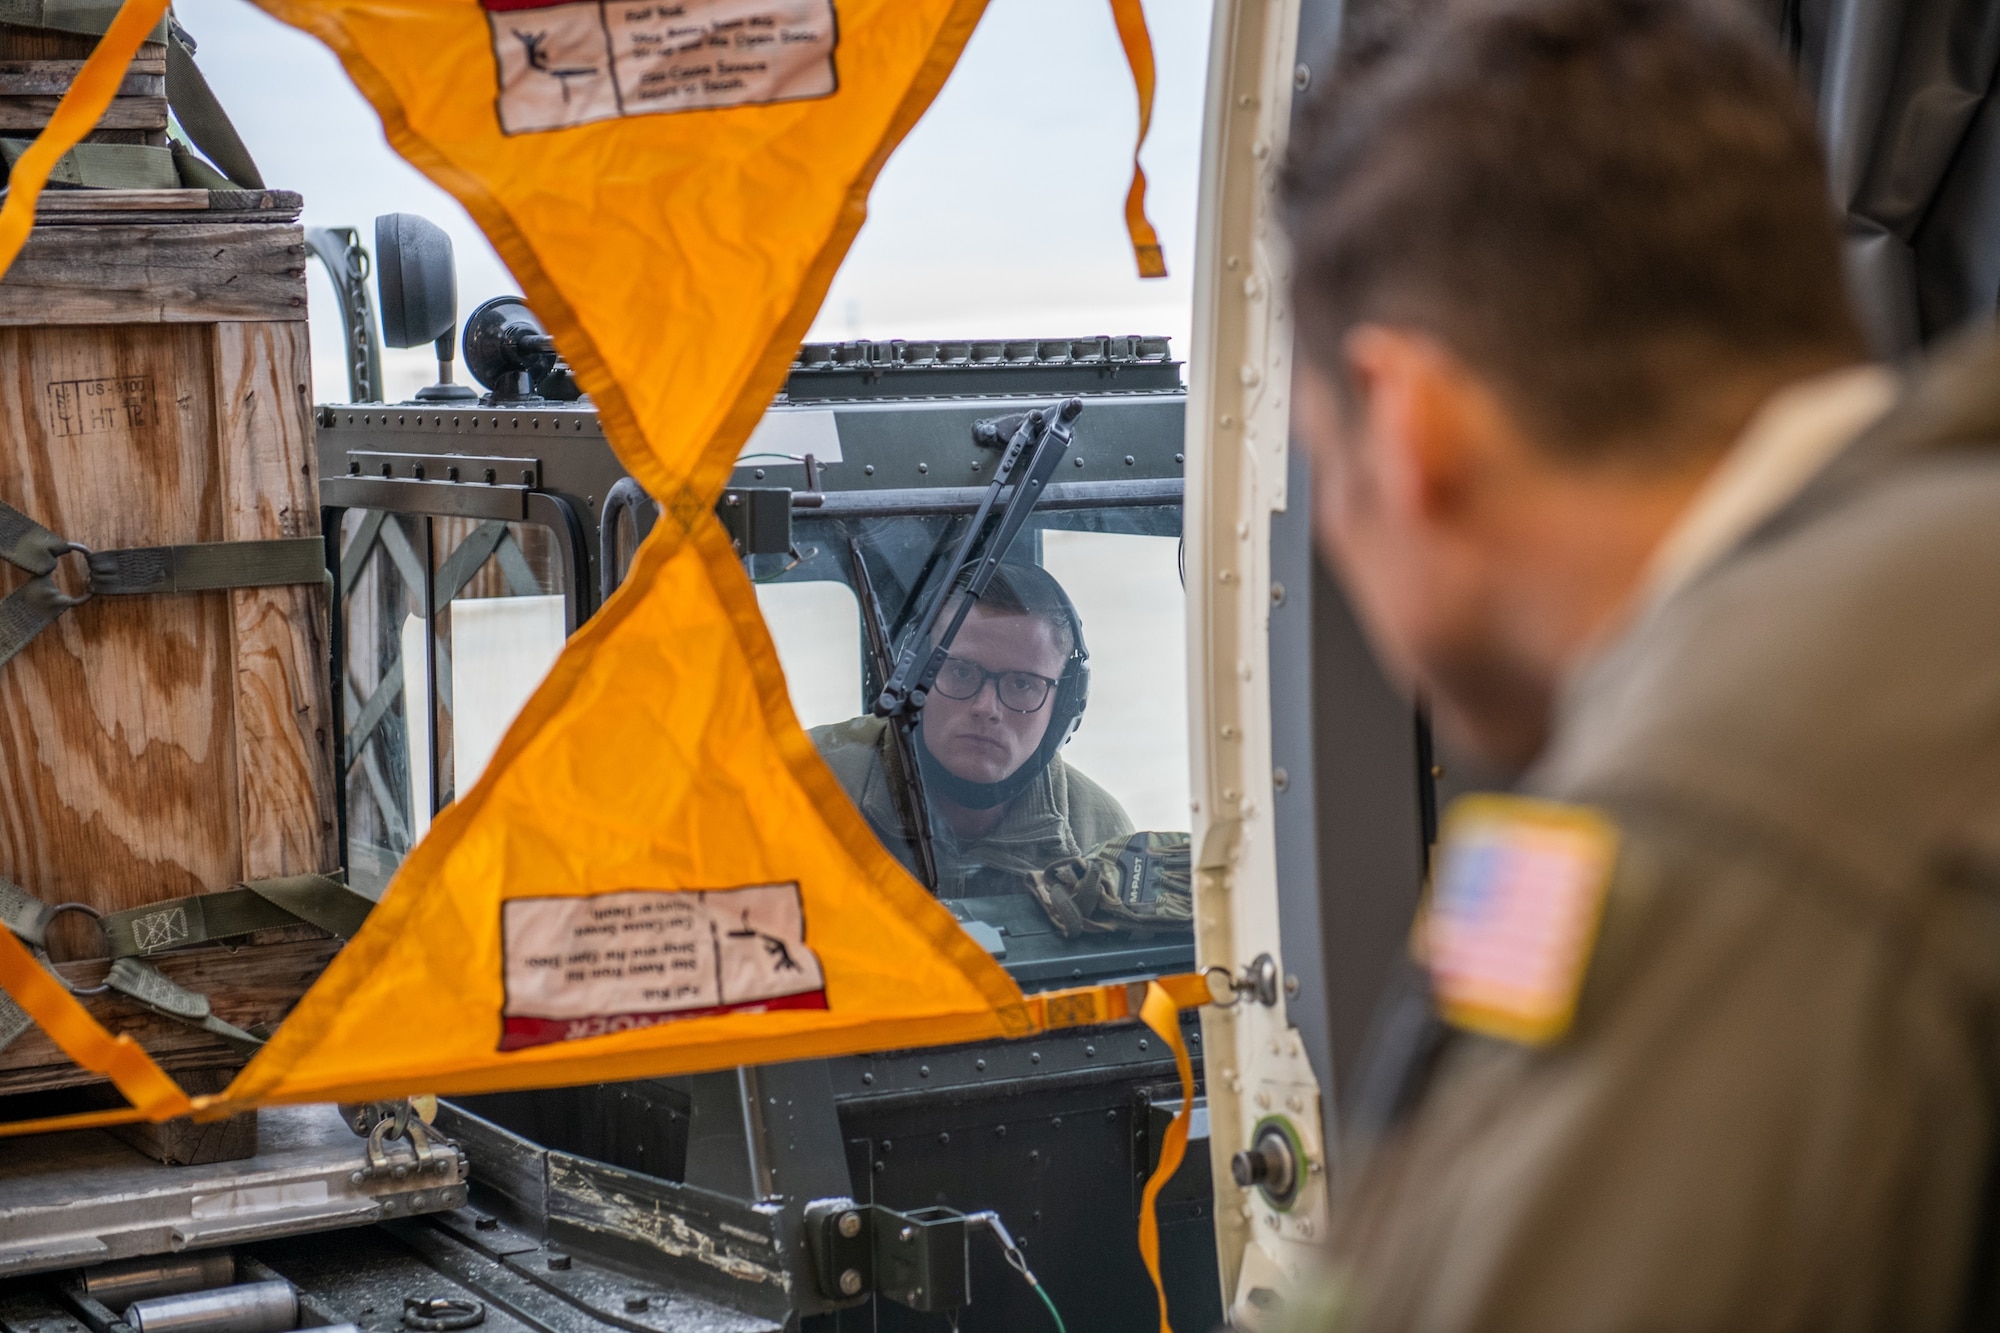 Tech. Sgt. Chris Davis, a boom operator from the 916th Air Refueling Wing, marshals Staff Sgt. Todd Rimmasch, an air transportation specialist in the 67th Aerial Port Squadron, in docking an aircraft cargo loader